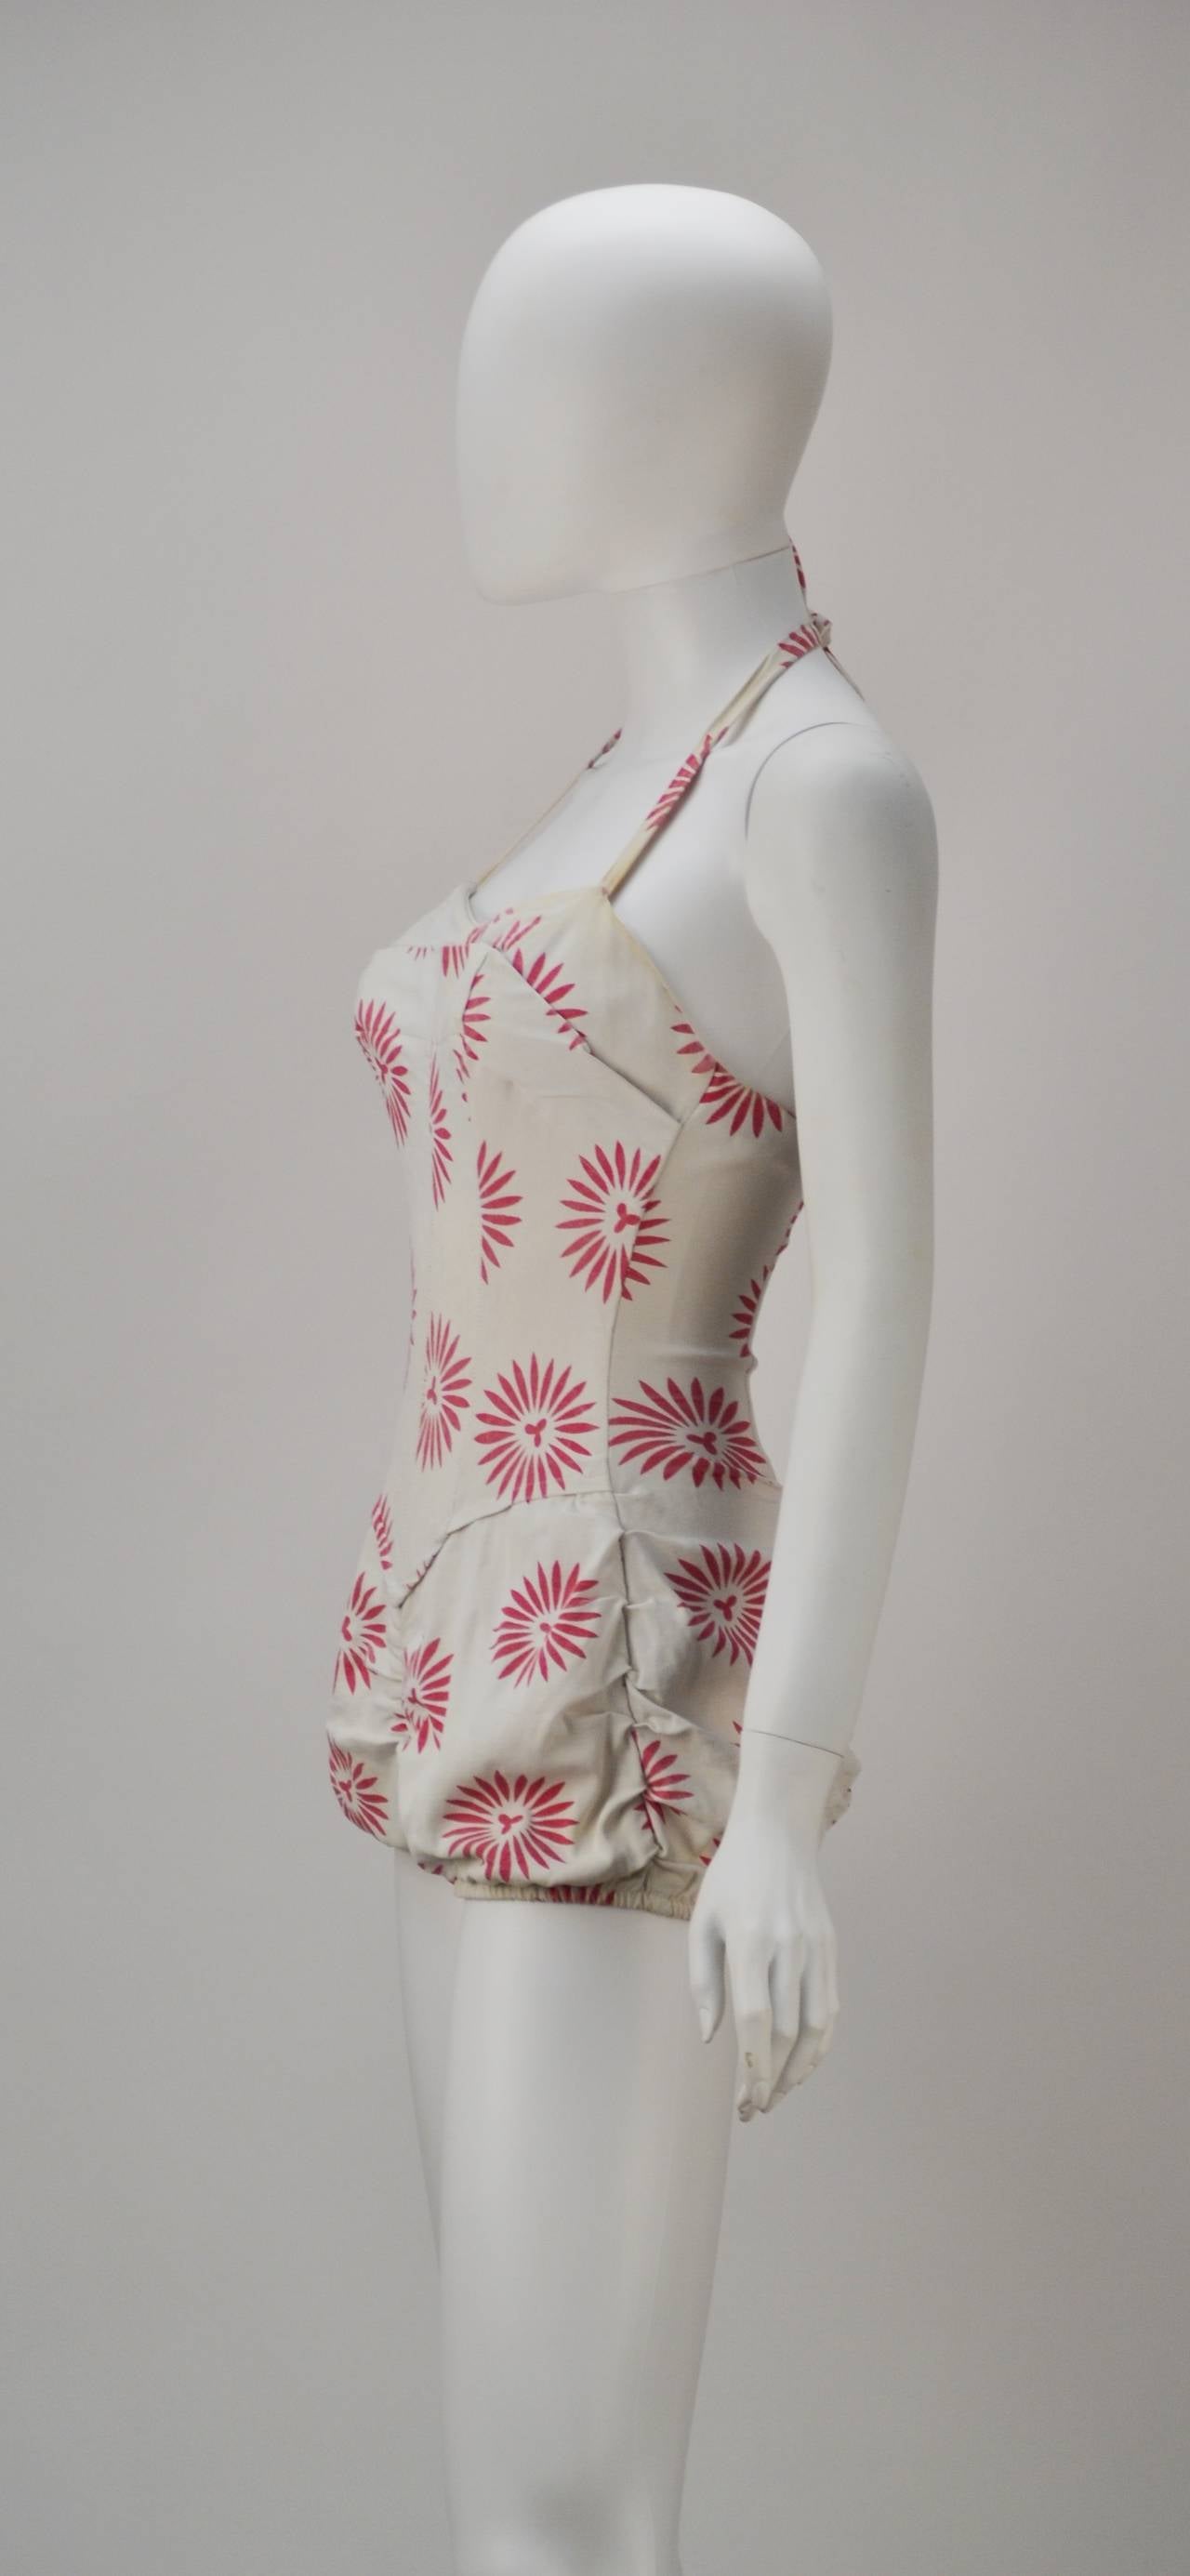 Looking for a vintage swimsuit for your winter vacation or for your short film? Swimsuits by Ms. Reid's are considered the most enviable pieces to wear and collect because of her groundbreaking prints and designs. This winner has a cute bloomer